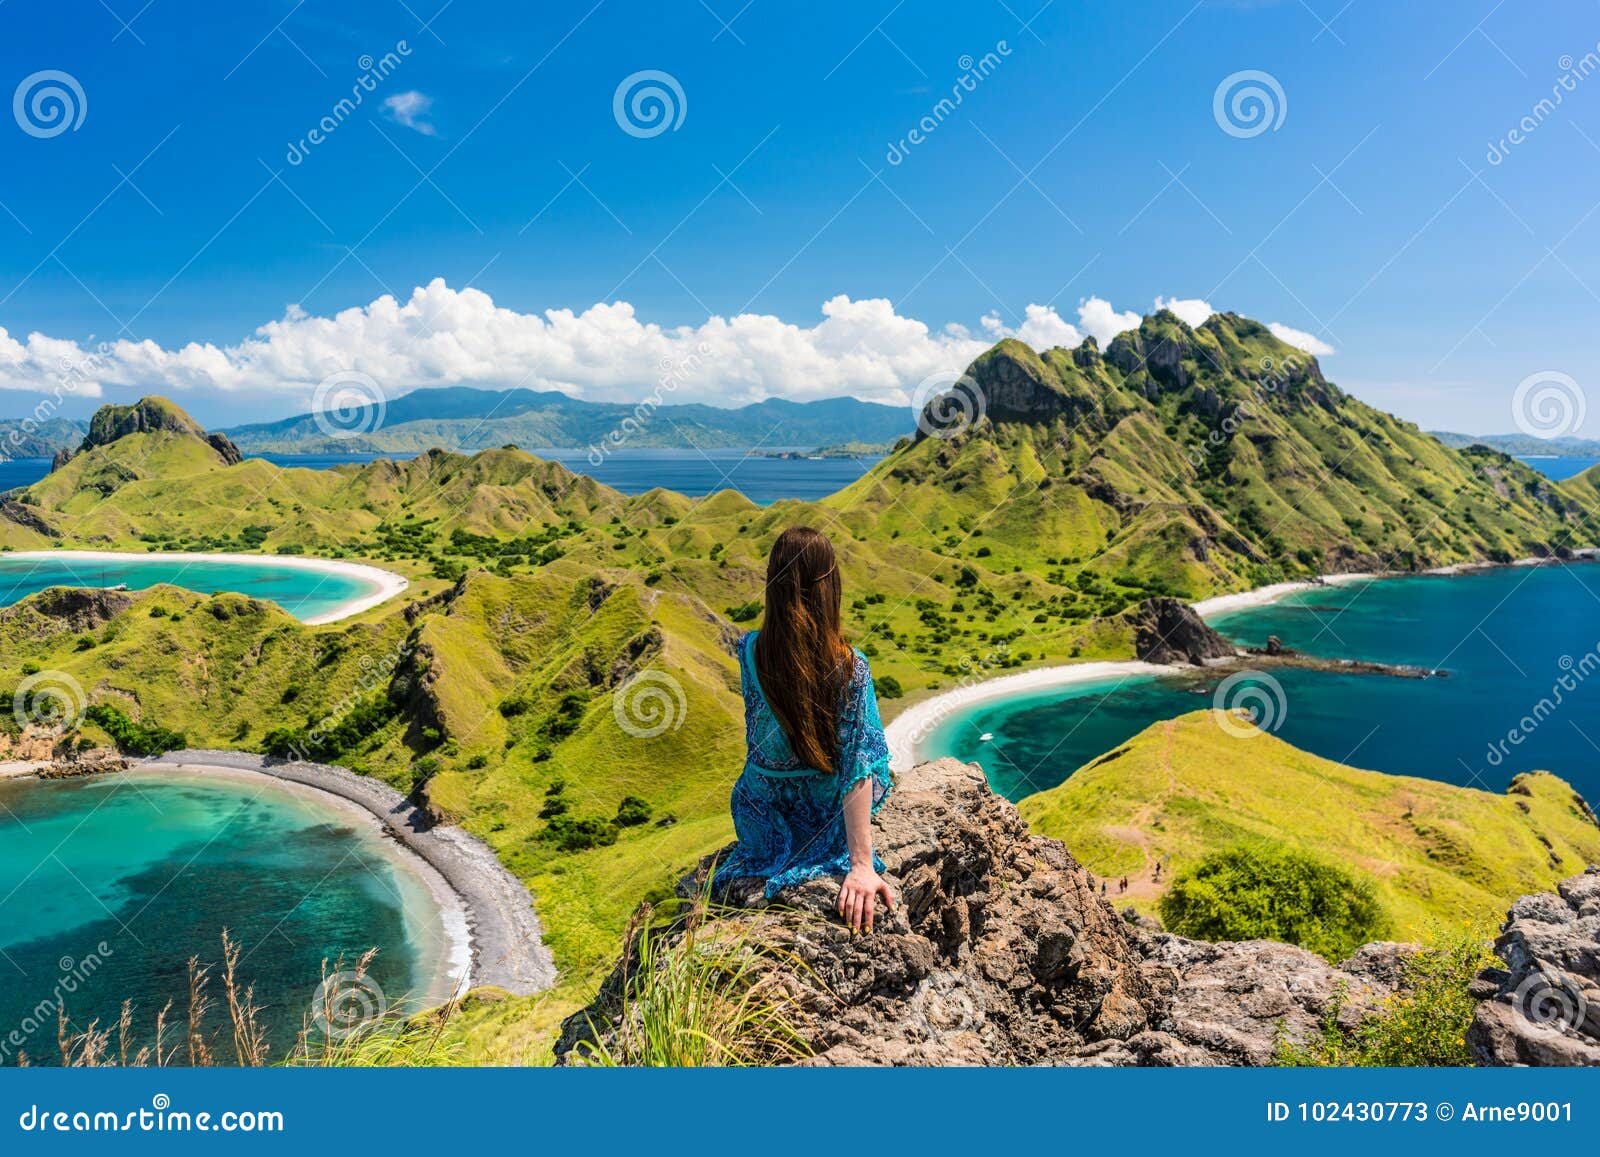 young woman enjoying the awesome view of padar island during sum